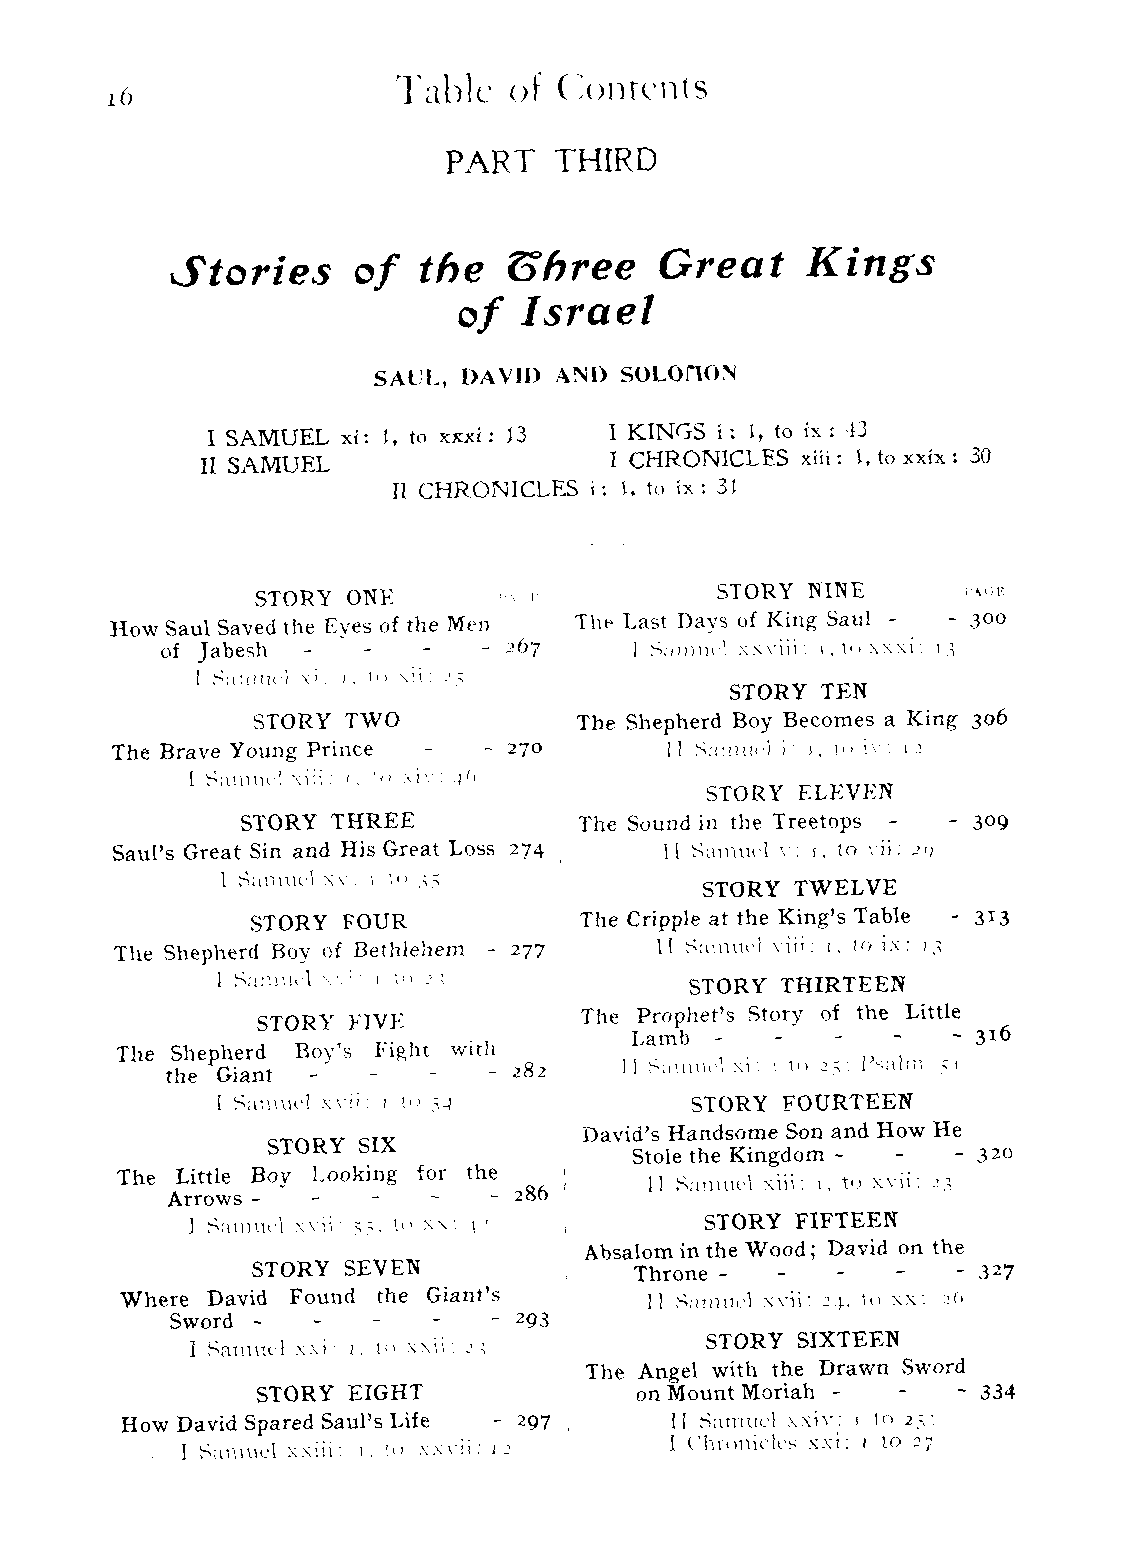 [Contents Page 4 of 10] from The Story of the Bible by Jesse Hurlbut